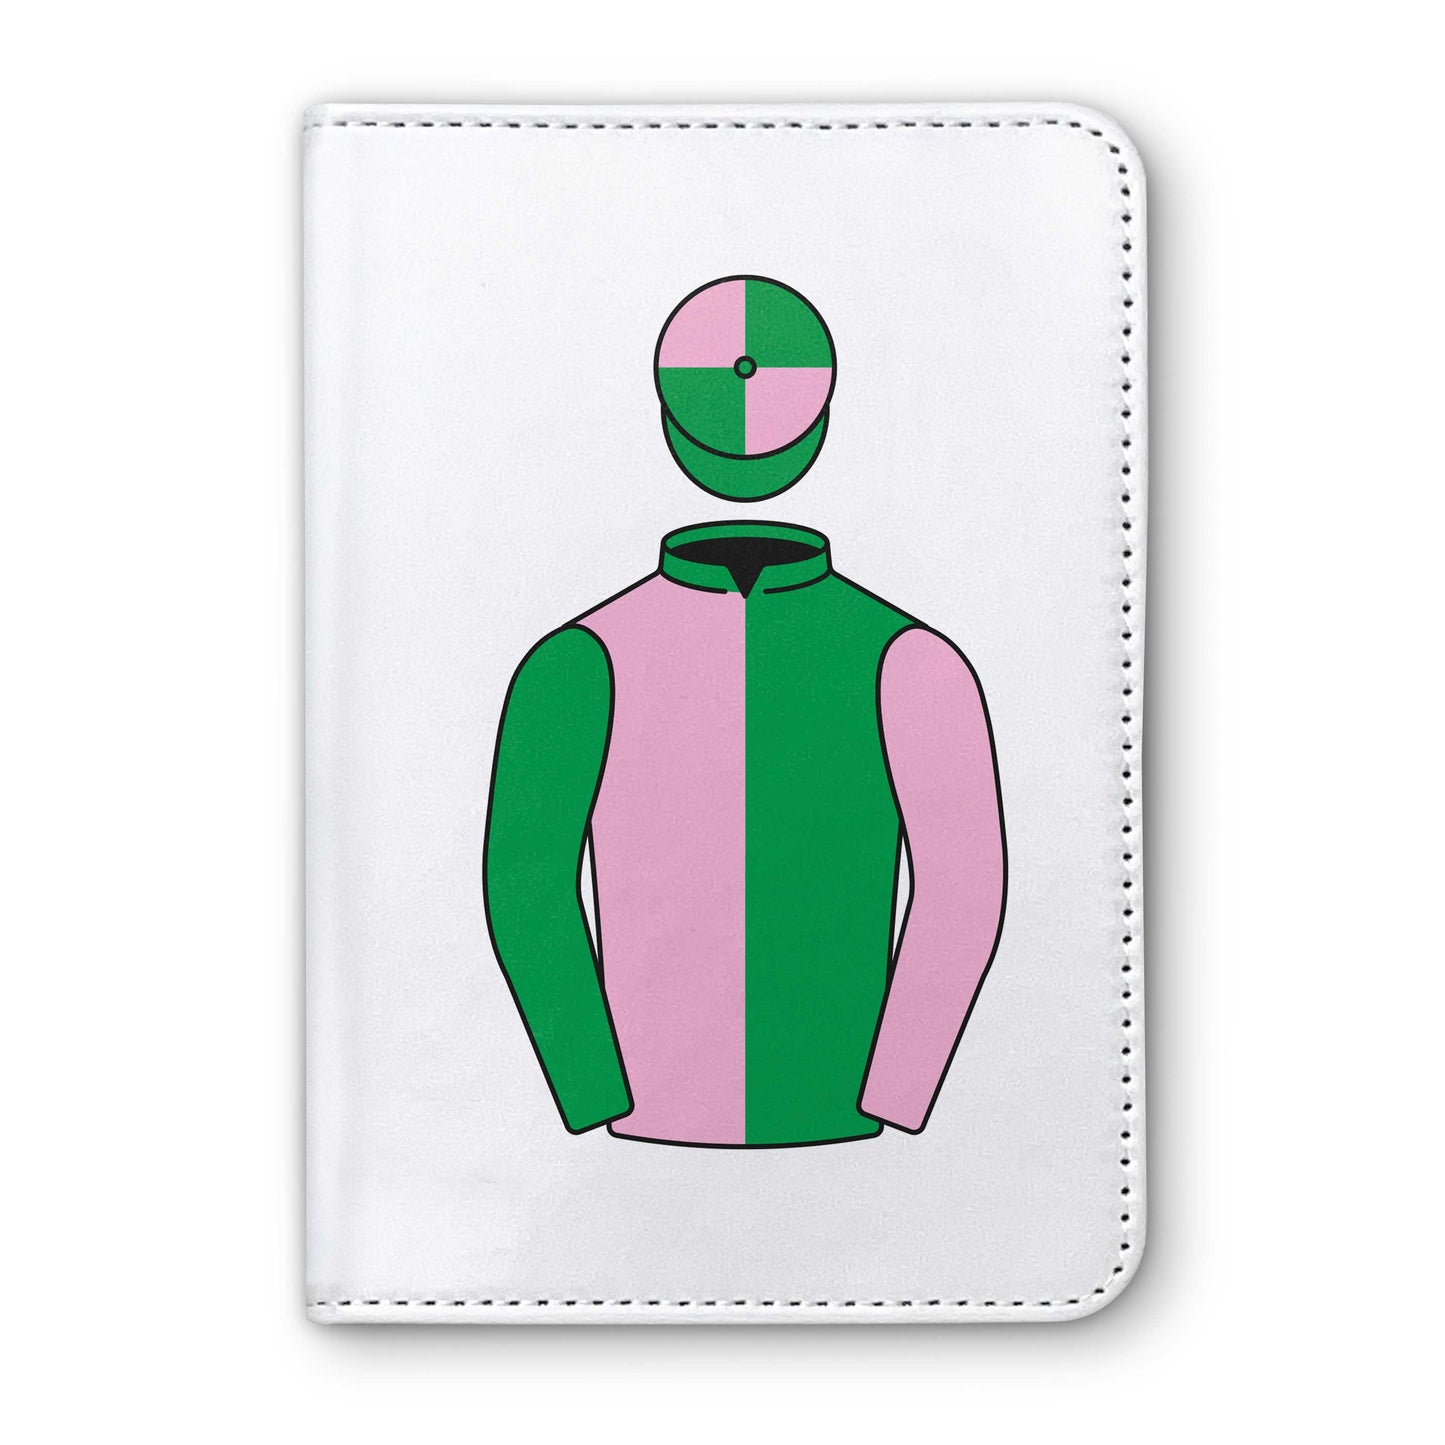 Mrs A F Mee And David Mee Horse Racing Passport Holder - Hacked Up Horse Racing Gifts